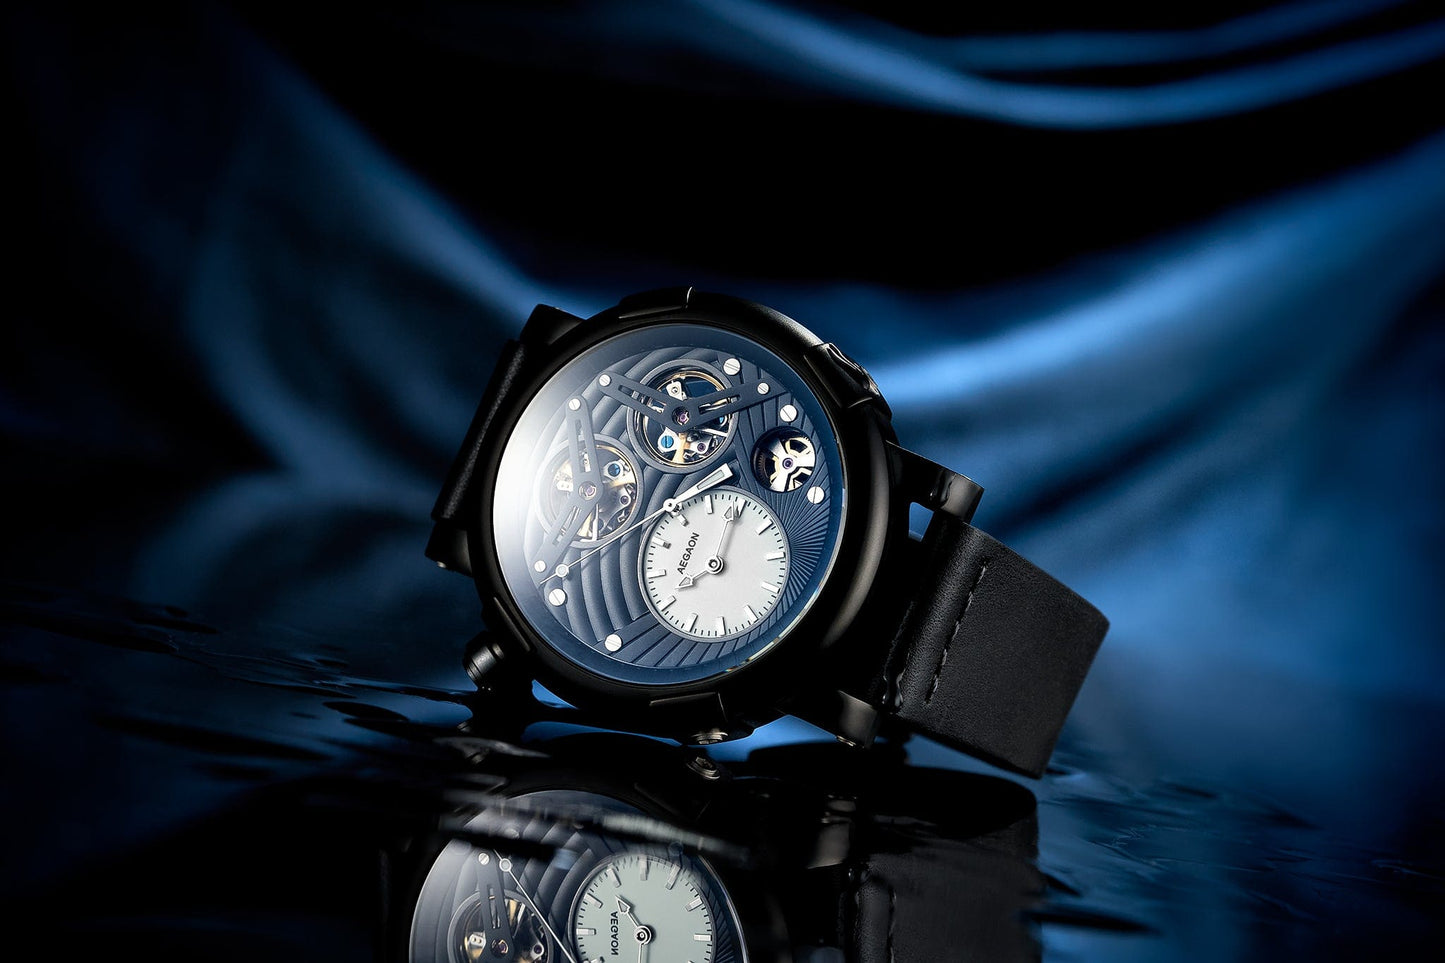 "TENET 48" Automatic (Black Limited Edition)